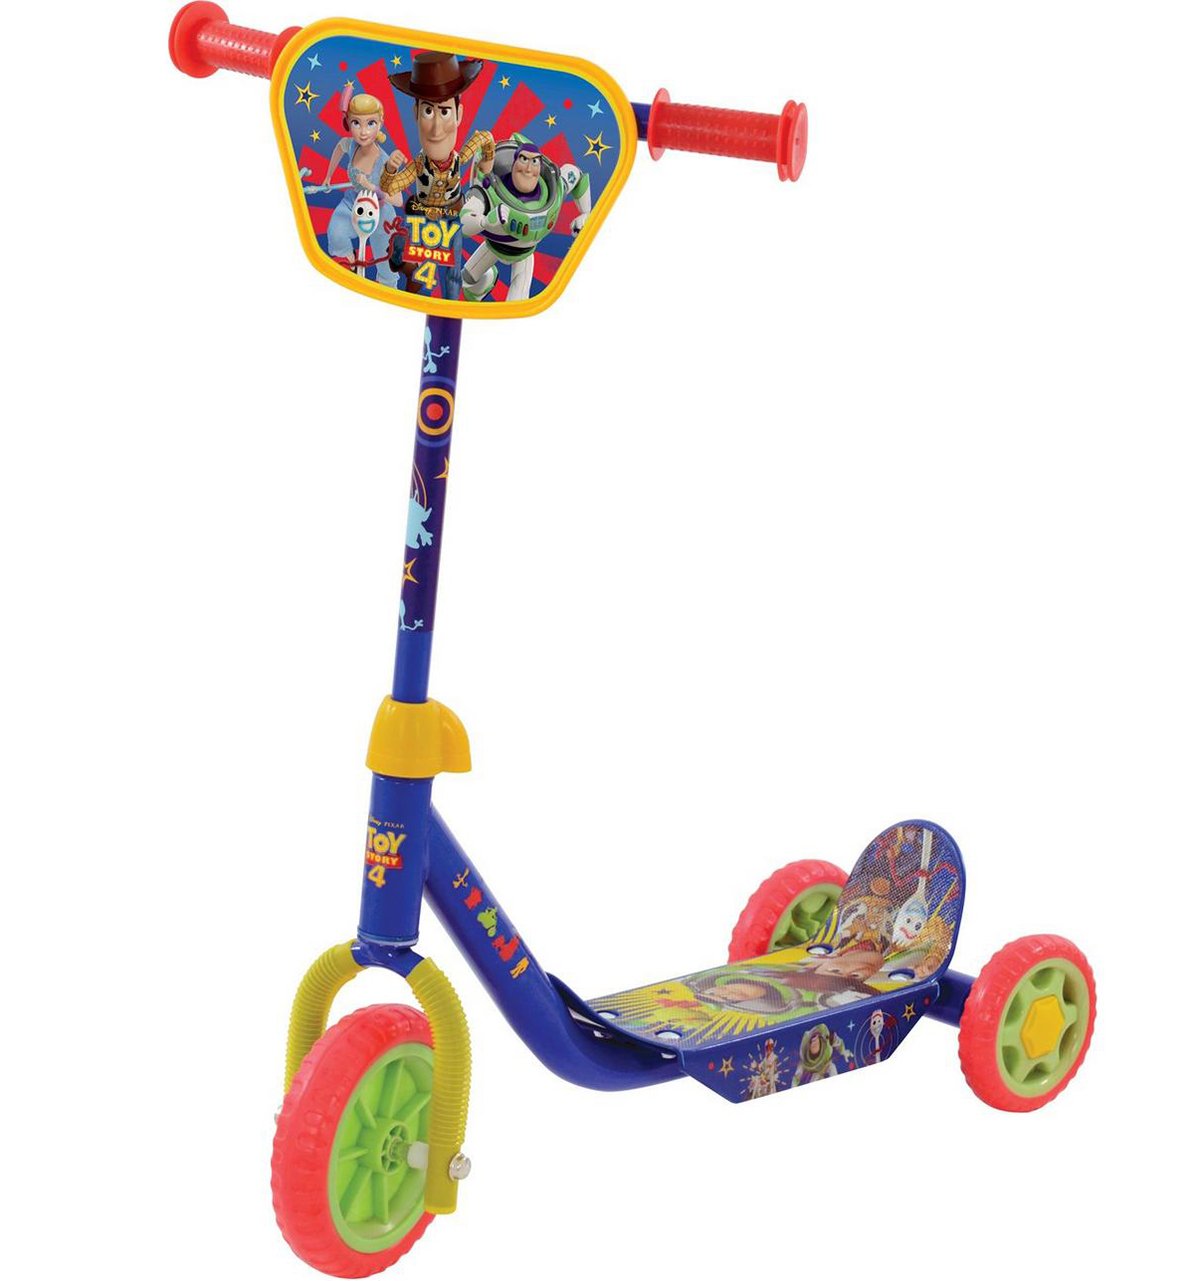 toy story bike for 3 year old